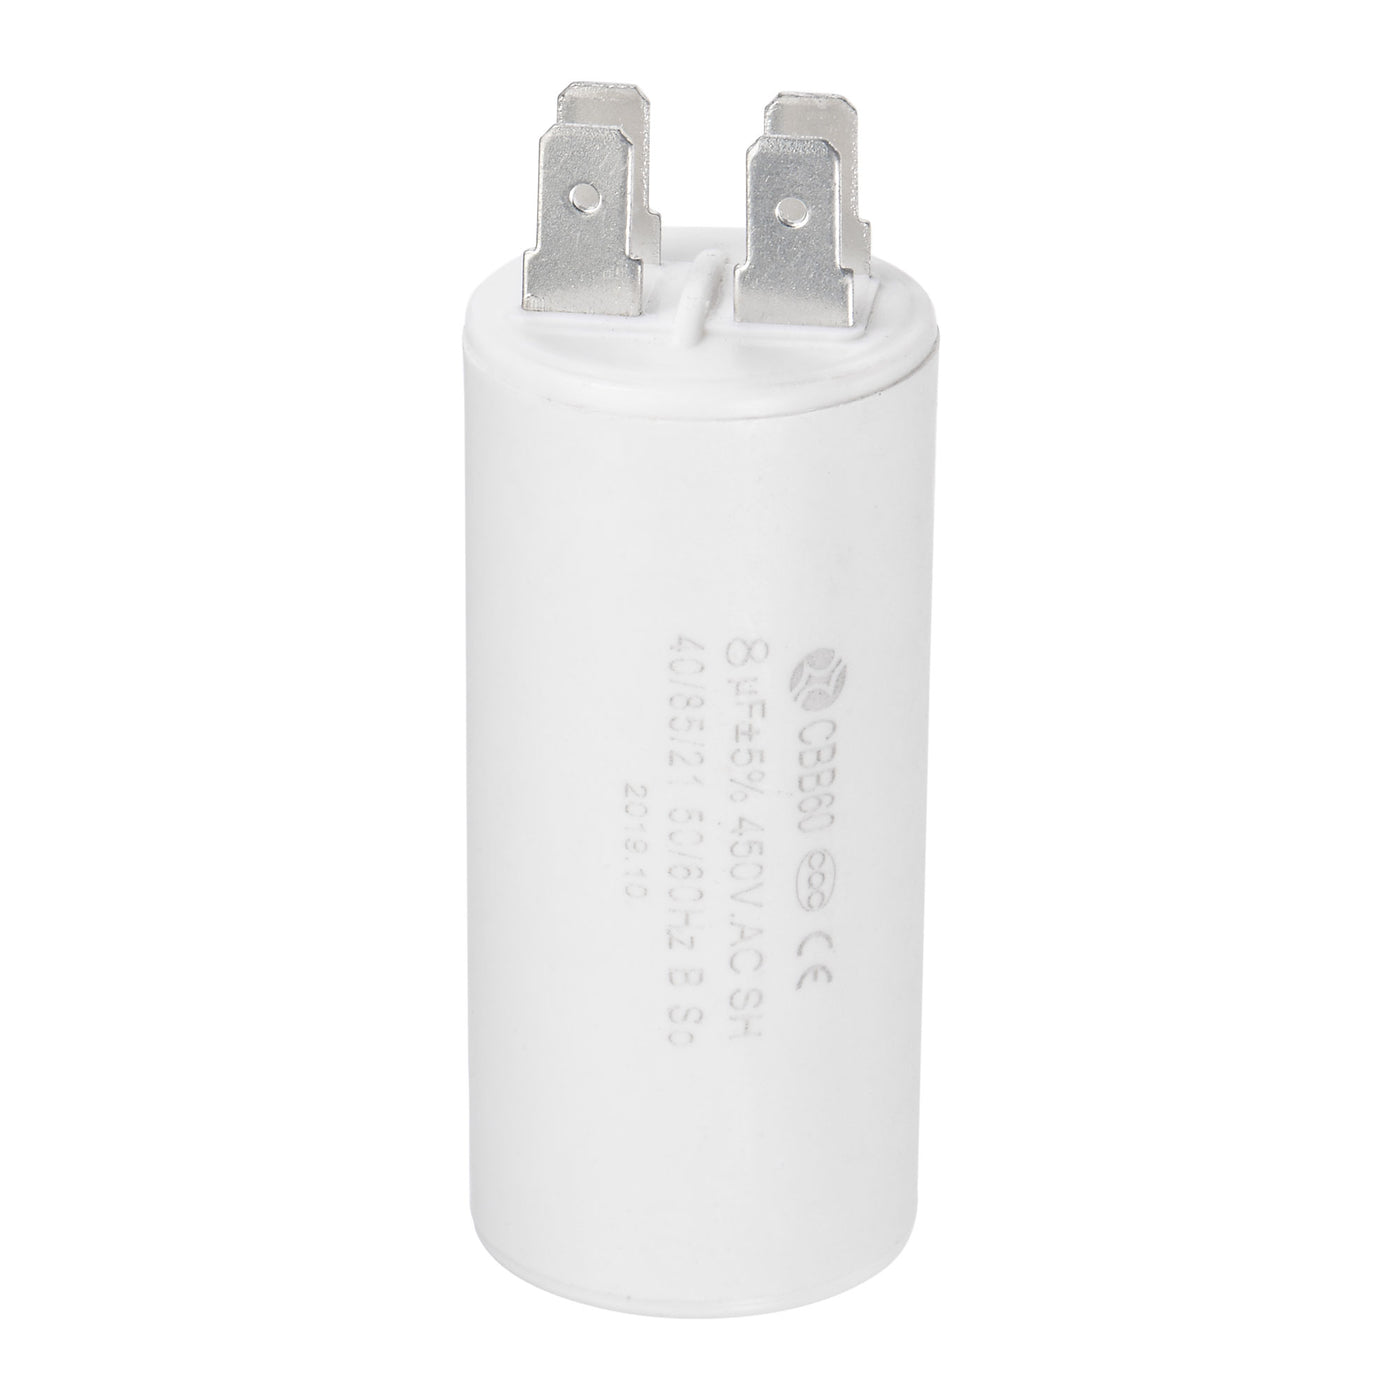 uxcell Uxcell CBB60 Run Capacitor 8uF 450V AC Double Insert 50/60Hz Cylinder 69x32mm White for Air Compressor Water Pump Motor